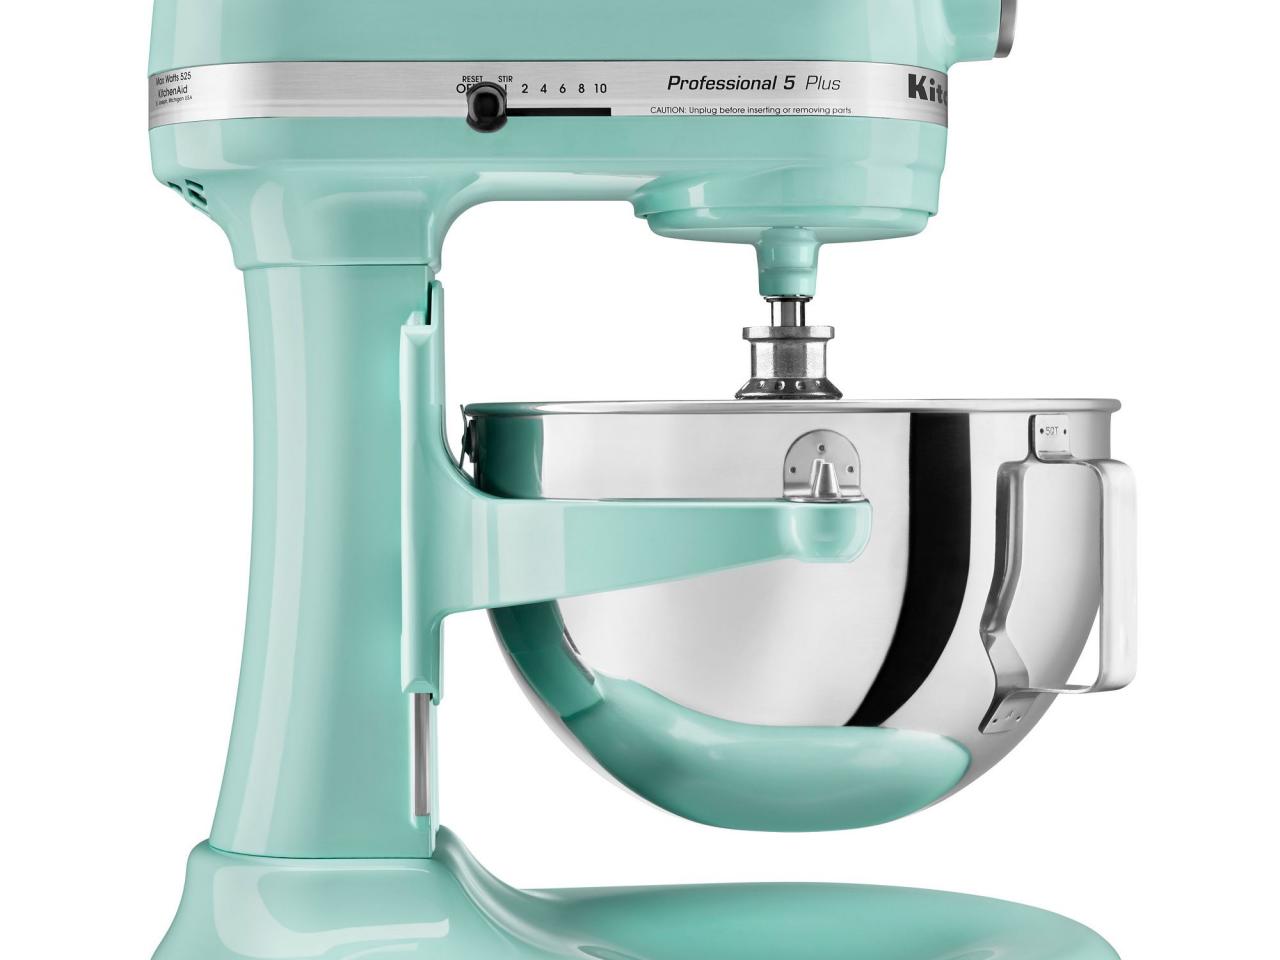 KitchenAid's Best Selling Stand Mixer is Over $100 off